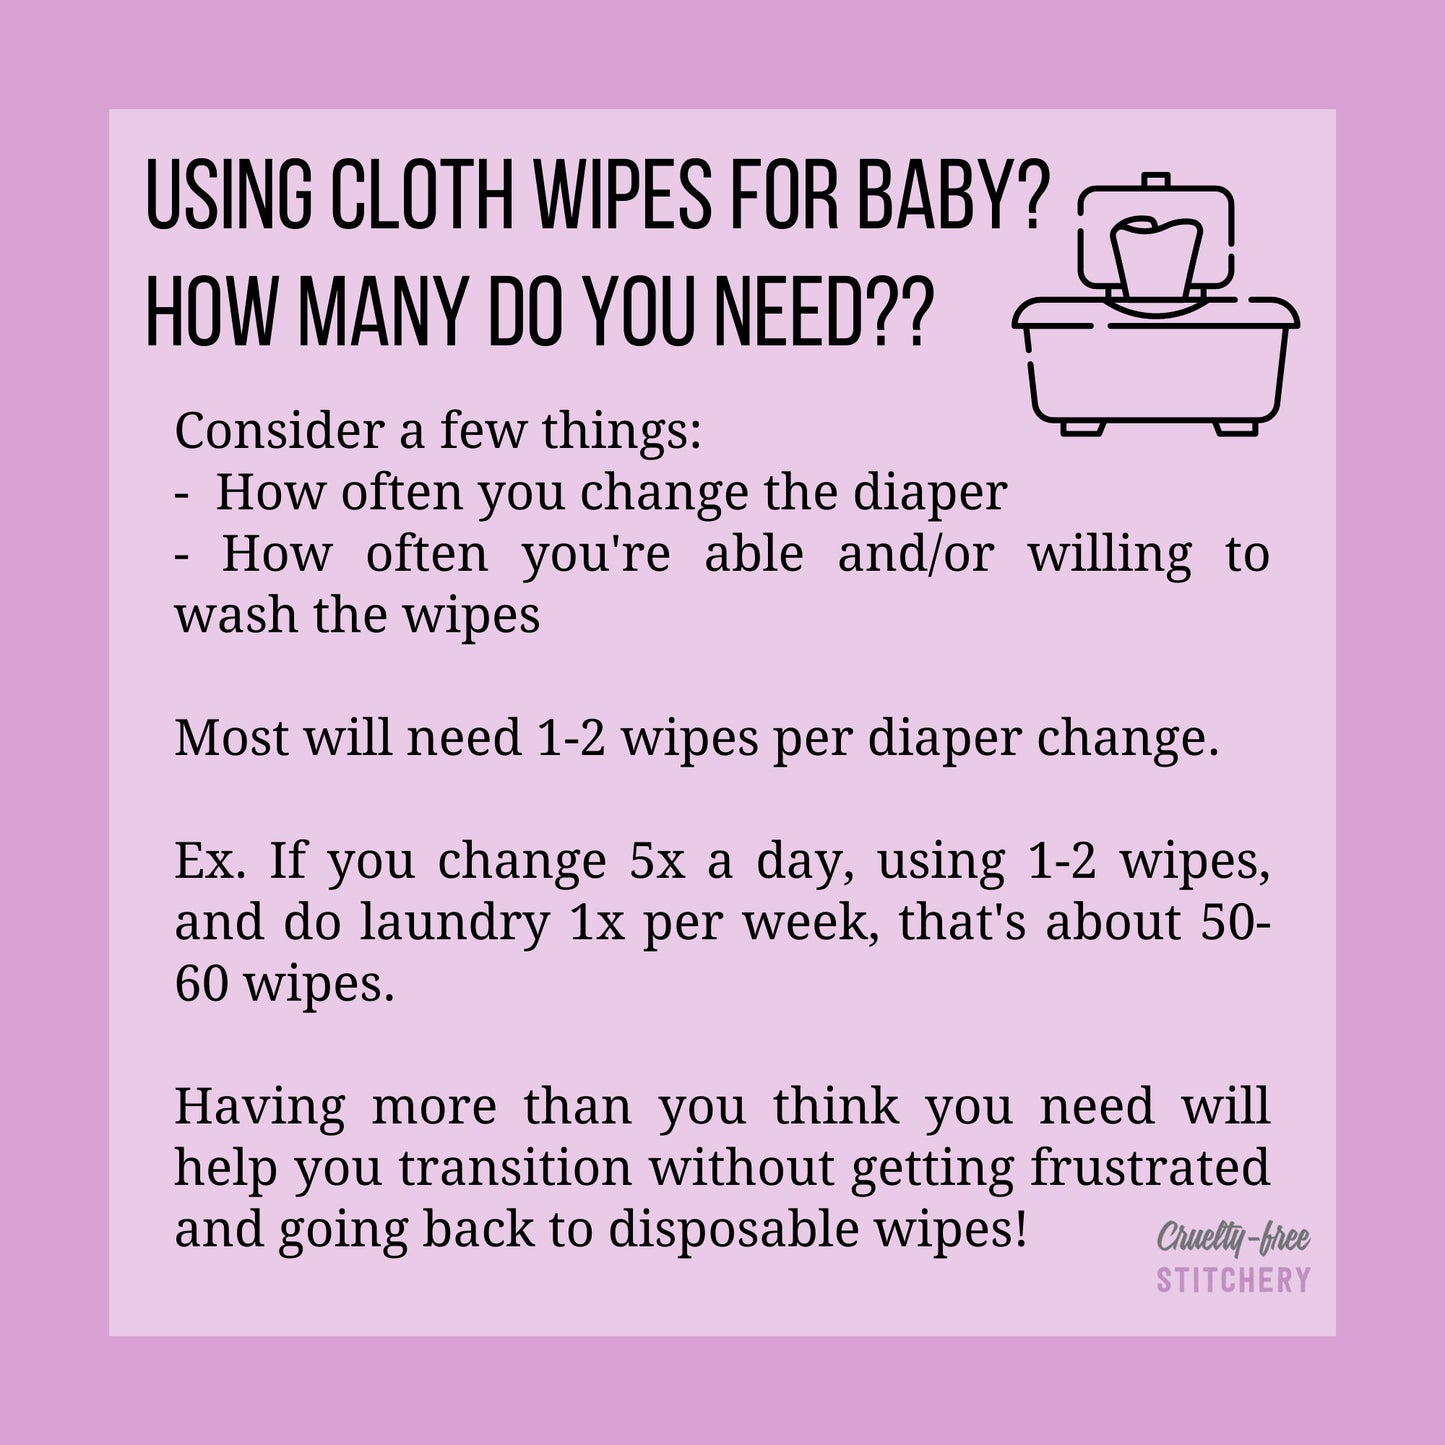 How many cloth wipes needed for baby. Consider how often you change diaper and how often you can wash. Most need 1-2 wipes per change. Having more than you think you need will help you transition without getting frustrated.